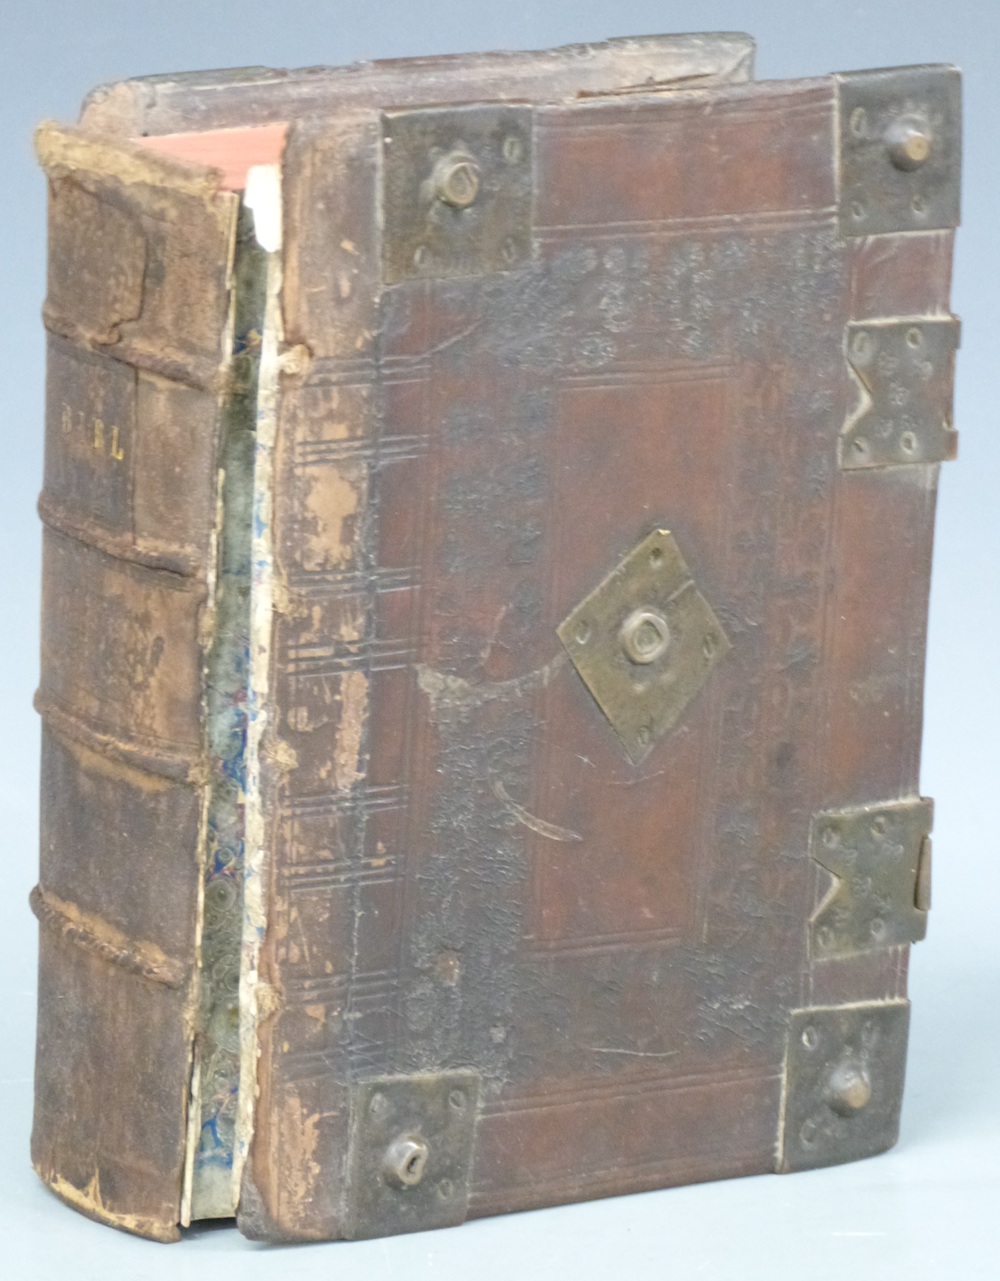 The Booke Of Common Prayer, With The Psalter Or Psalmes Of David, Of Their Translation Imprinted At London By Robert Barker Printer To The Kings Most Excellent Majestie 1607 HAMMER £1200